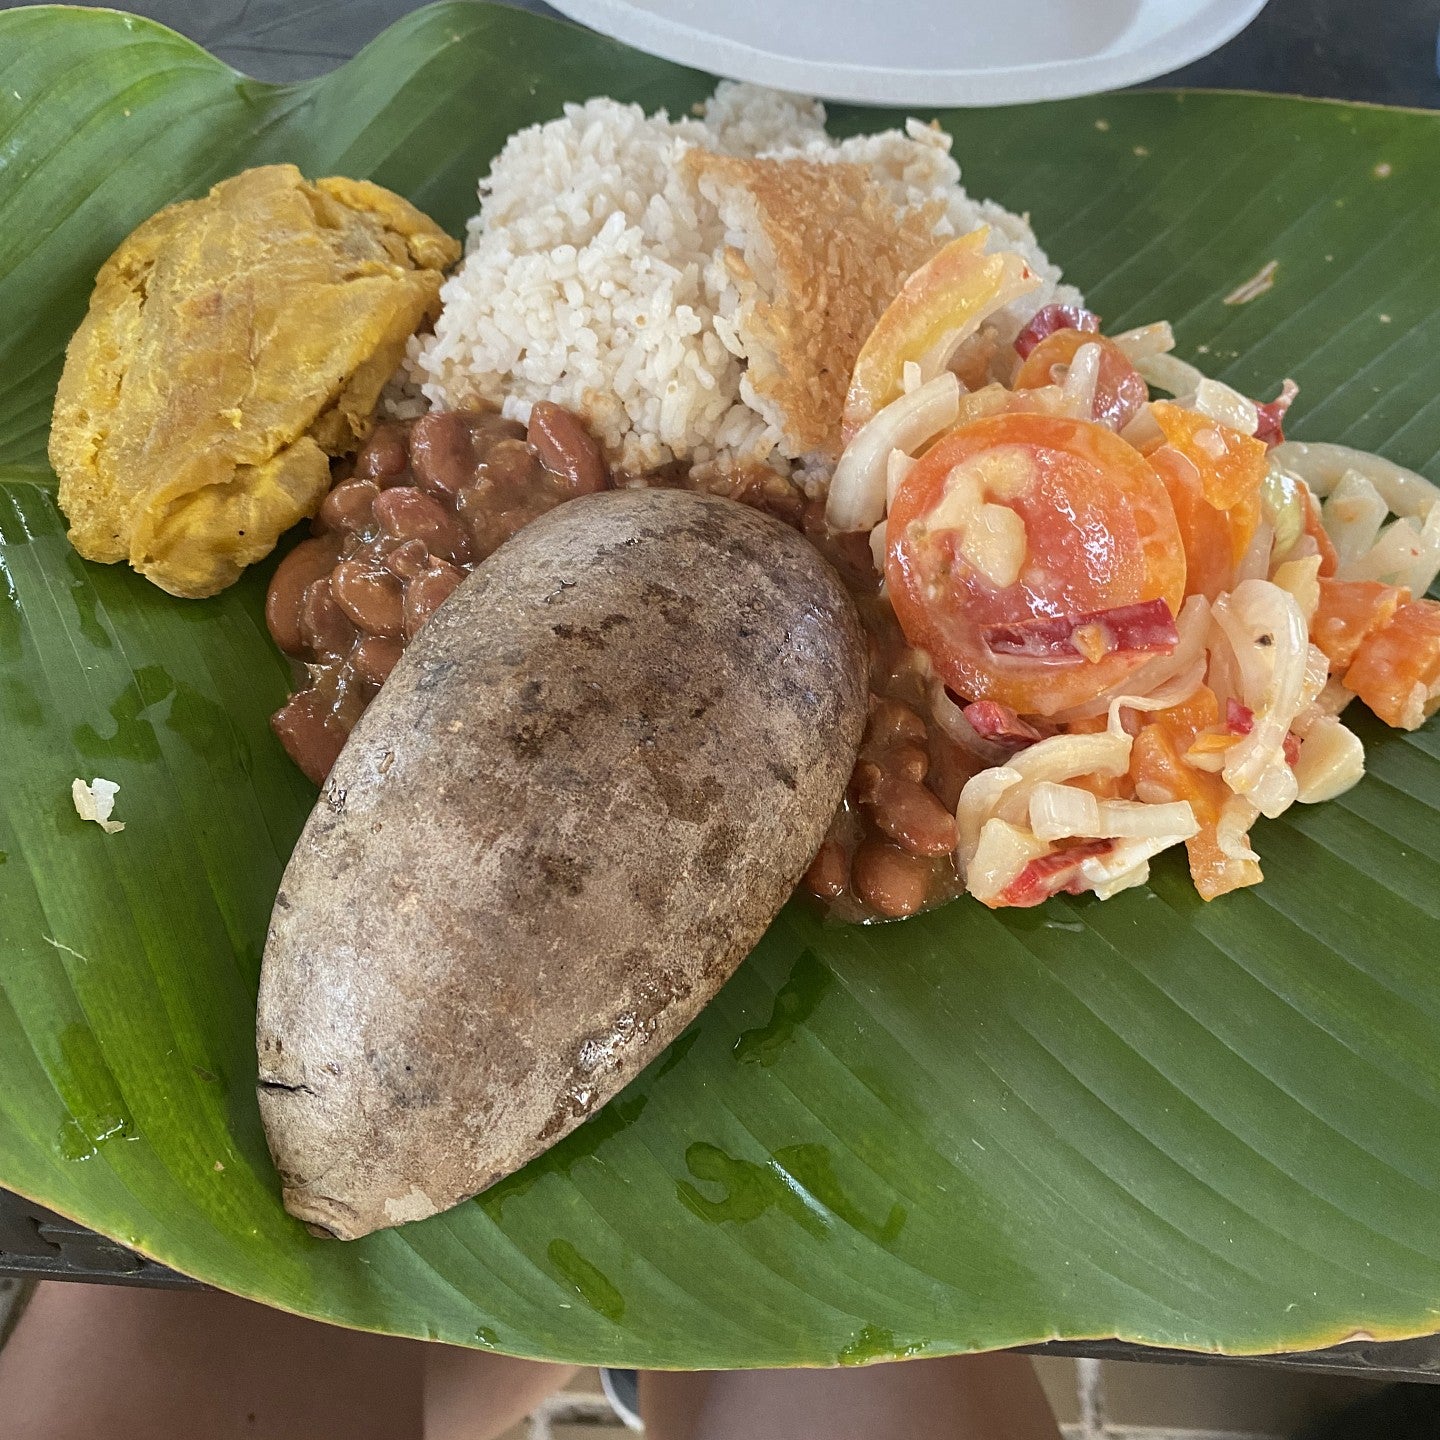 a meal of rice, beans, fried plantains, tomato salad and a baked potato nestled in a banana leaf